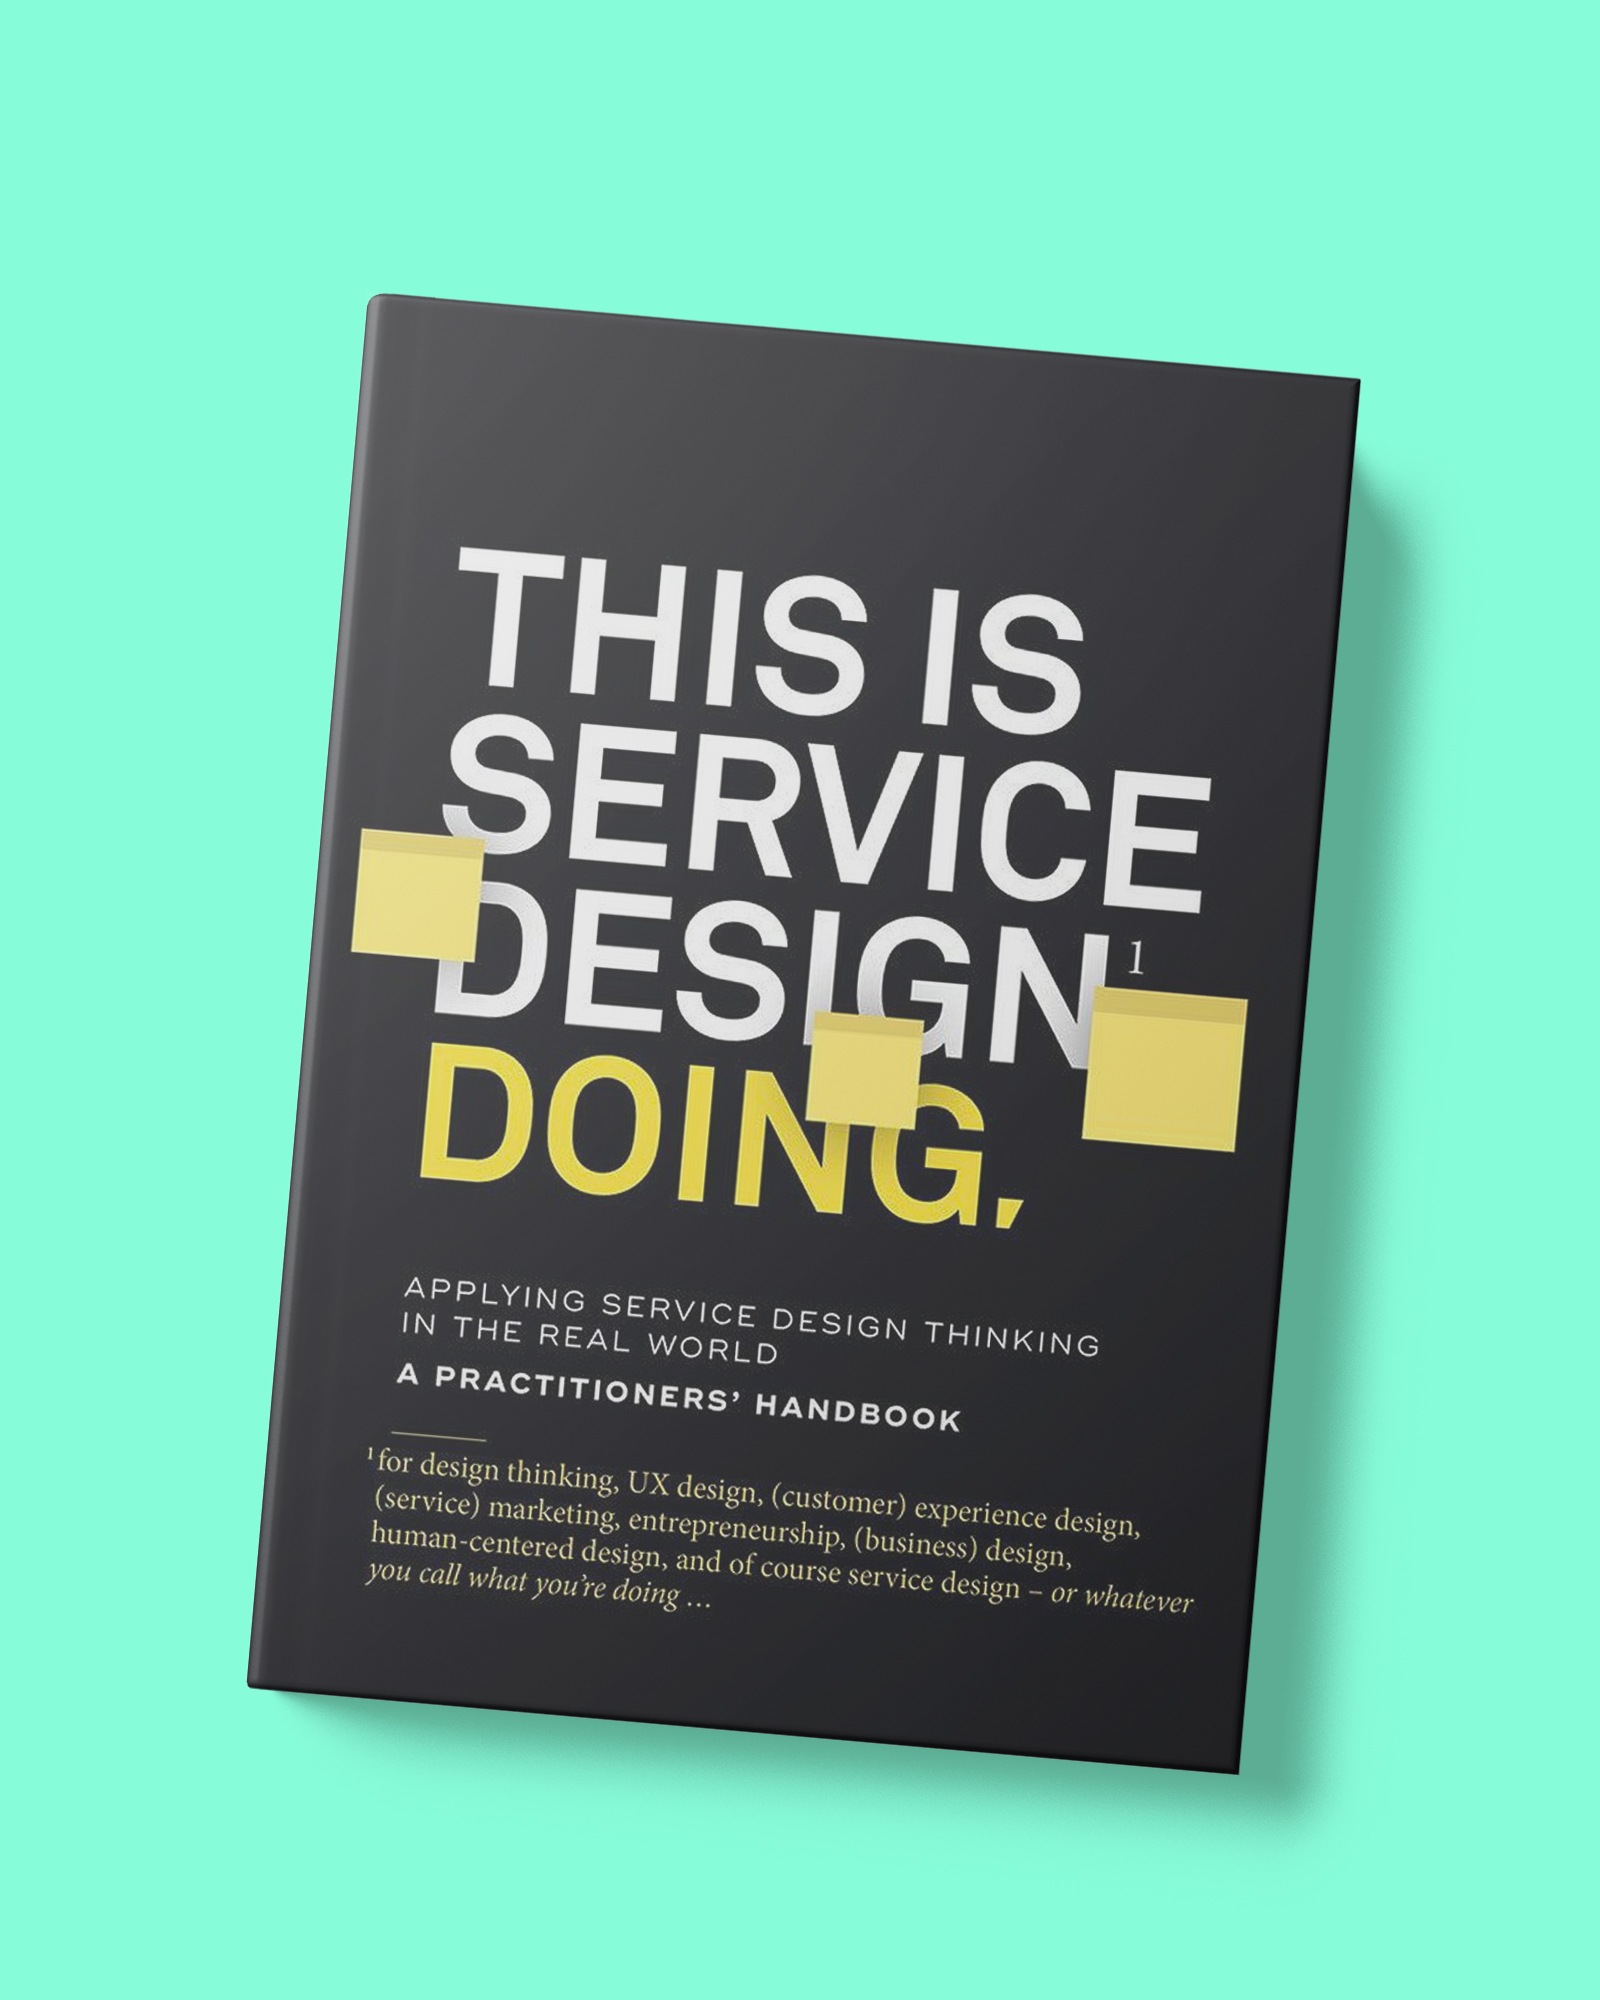 TDC | Behavior design - Book_This Is Service Design Doing- Applying Service Design and Design Thinking in the Real World